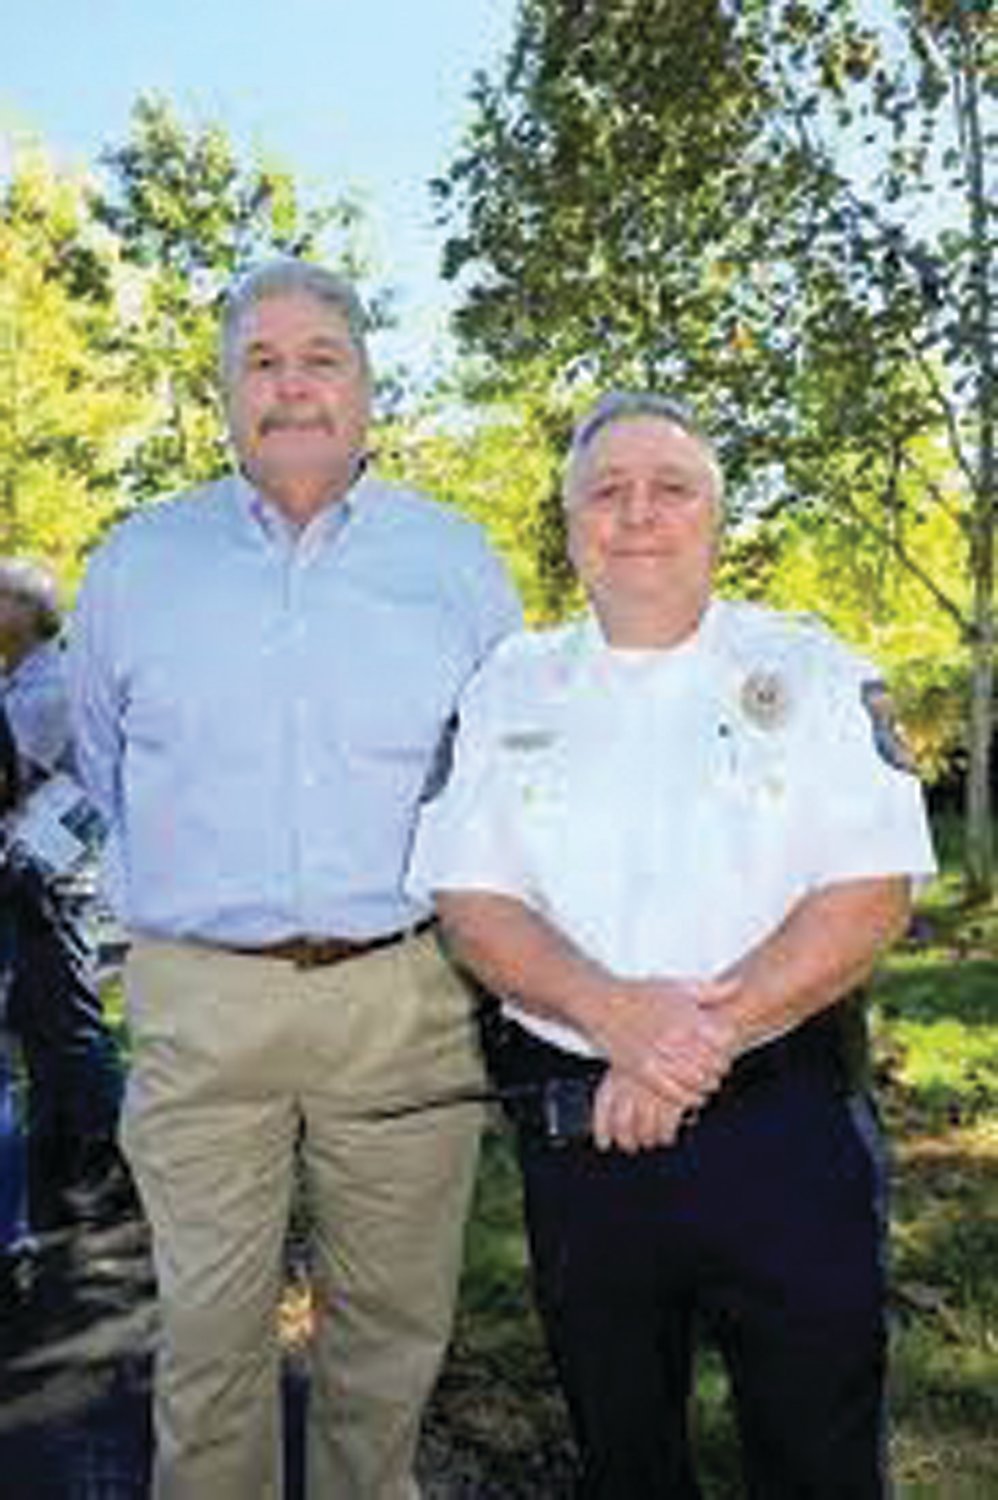 Solebury Township Manager Dennis H. Carney, left, stands with Solebury Police Chief Dominick Bellizzie at the opening of Aquetong Spring Park.